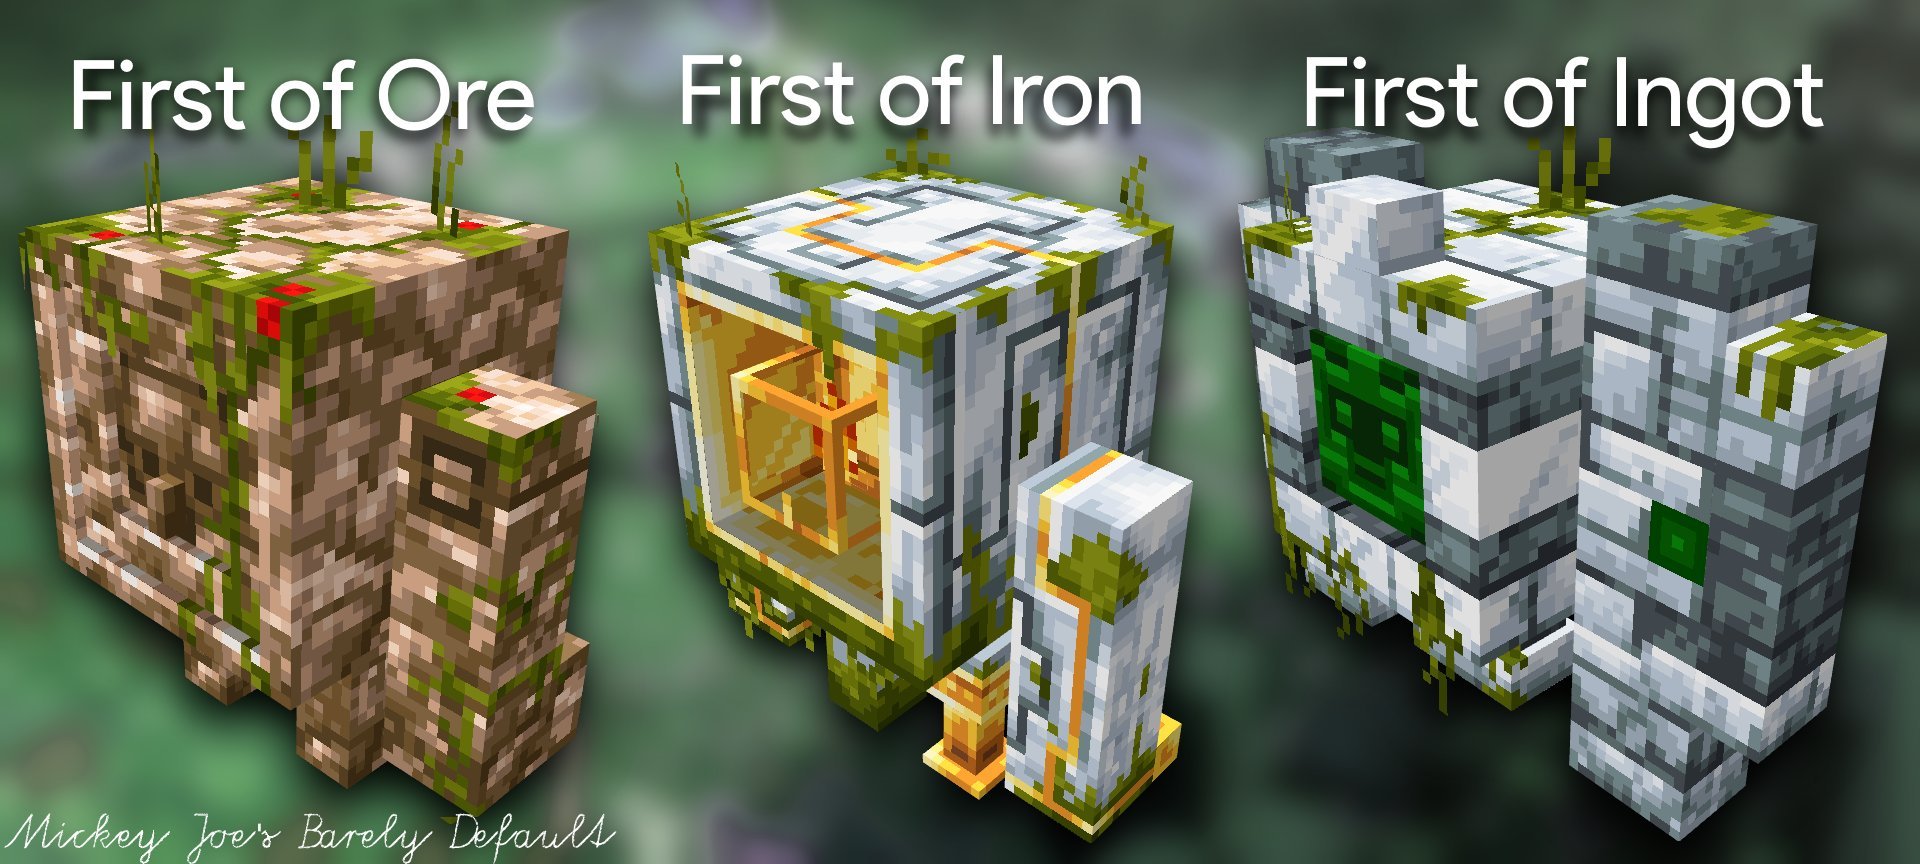 The special golems from Mc Legends as iron golem variants